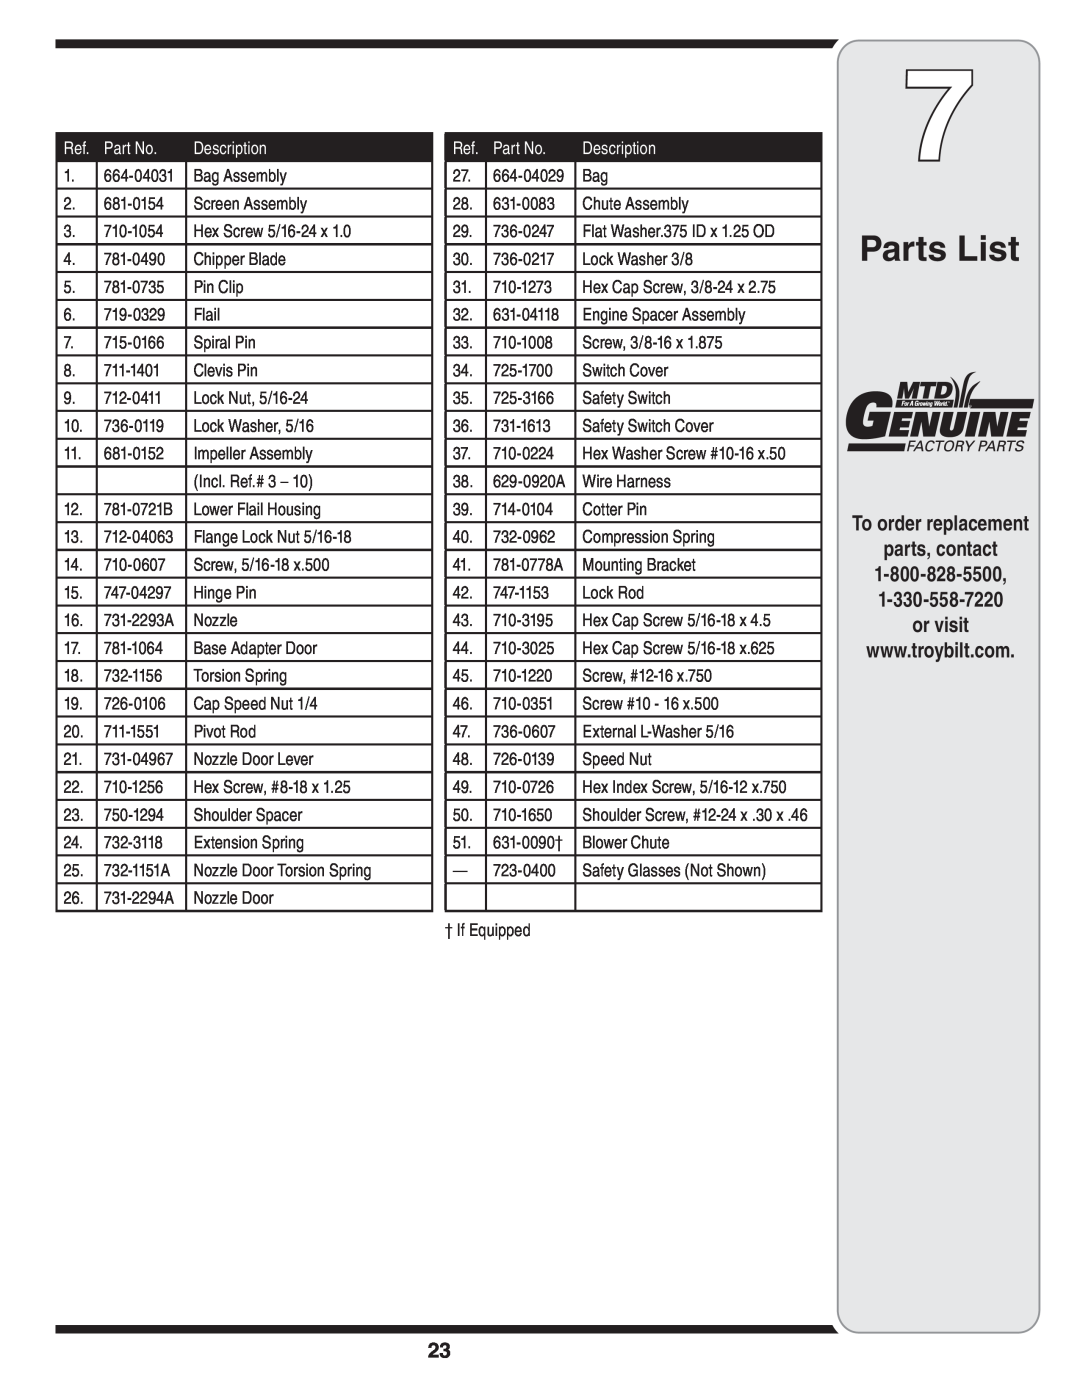 Troy-Bilt 70 warranty Parts List, To order replacement parts, contact, or visit, Ref. Part No 